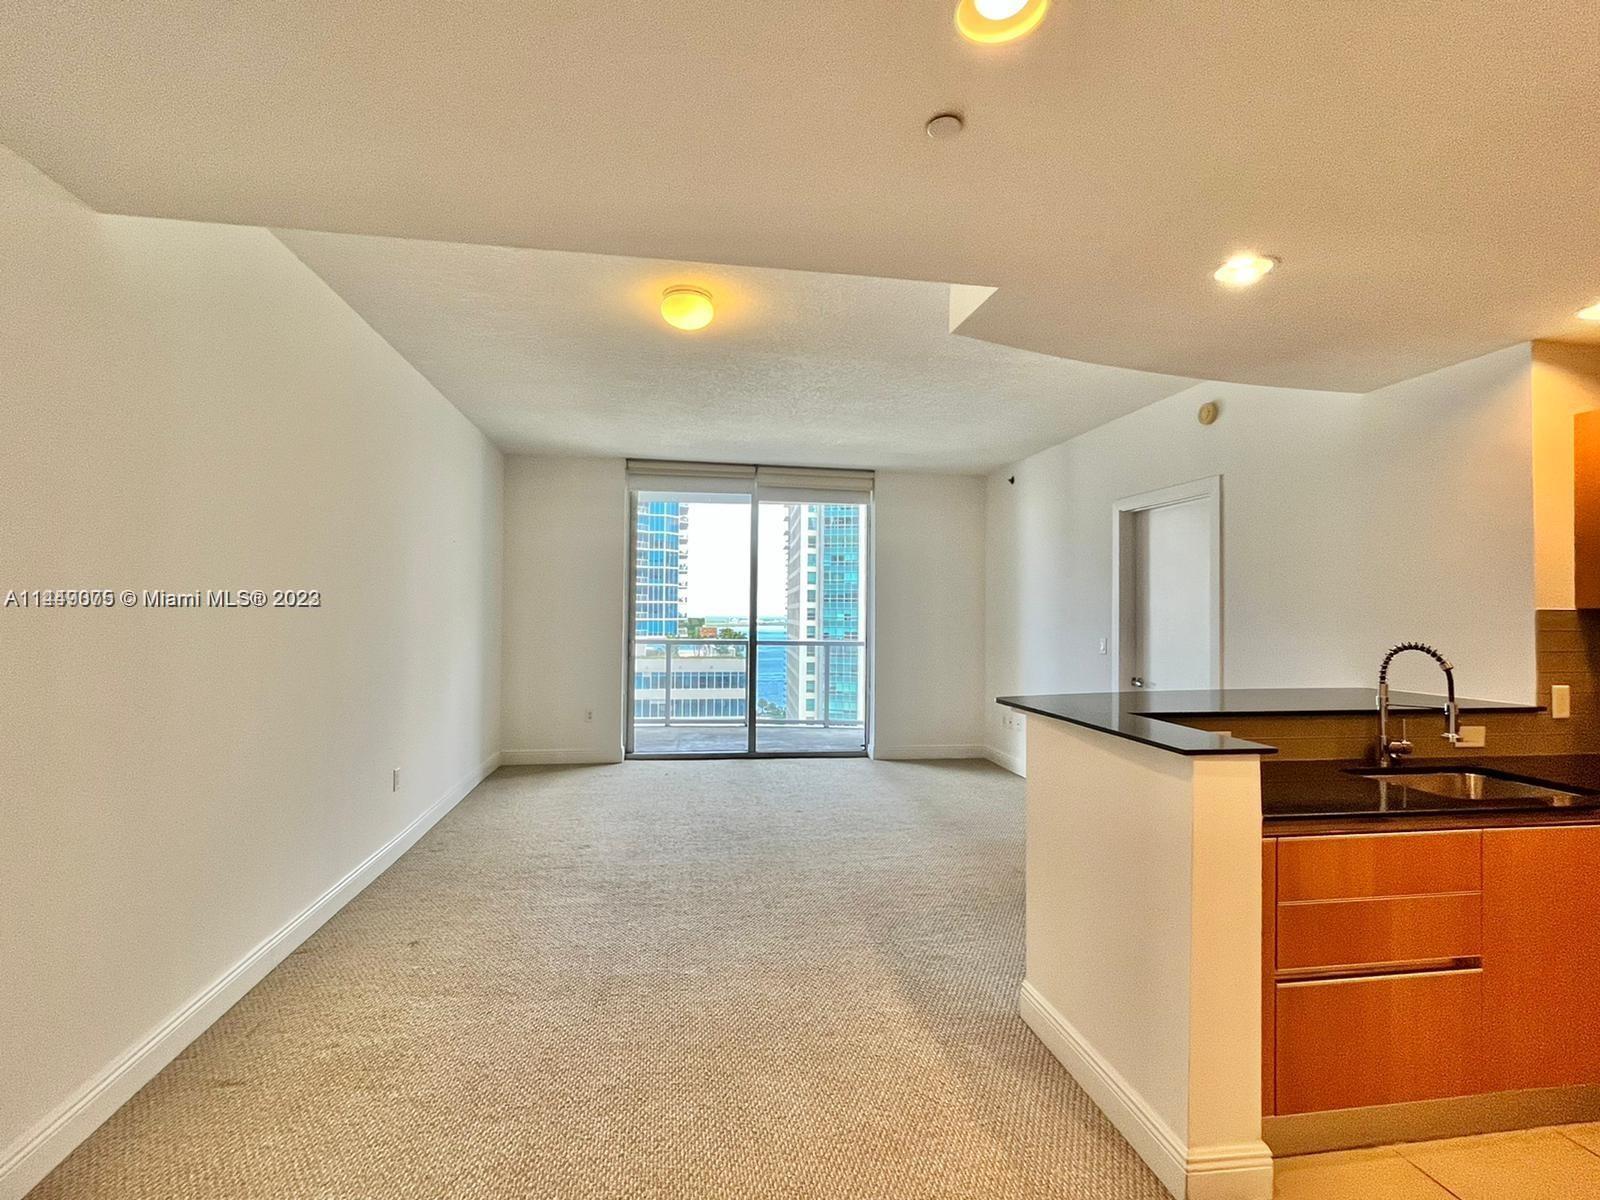 Beautiful condo at the 1060 in the heart of Brickell. The largest 1 bedroom, 1.5 bathroom model , wood cabinets, granite countertop, stainless steel appliances, walking closet, washer-dryer, external A/C closet. Full-service building with countless amenities: pool, spa, 24 hours concierge, business center, fully equipped gym with yoga area, massage room, wine & cigar rooms, billiard, and virtual golf. Walking distance to Brickell City Center and my other shops, wonderful restaurants, and all the entertainment Brickell has to offer. Easy access to Metro Mover and Metro Rail.